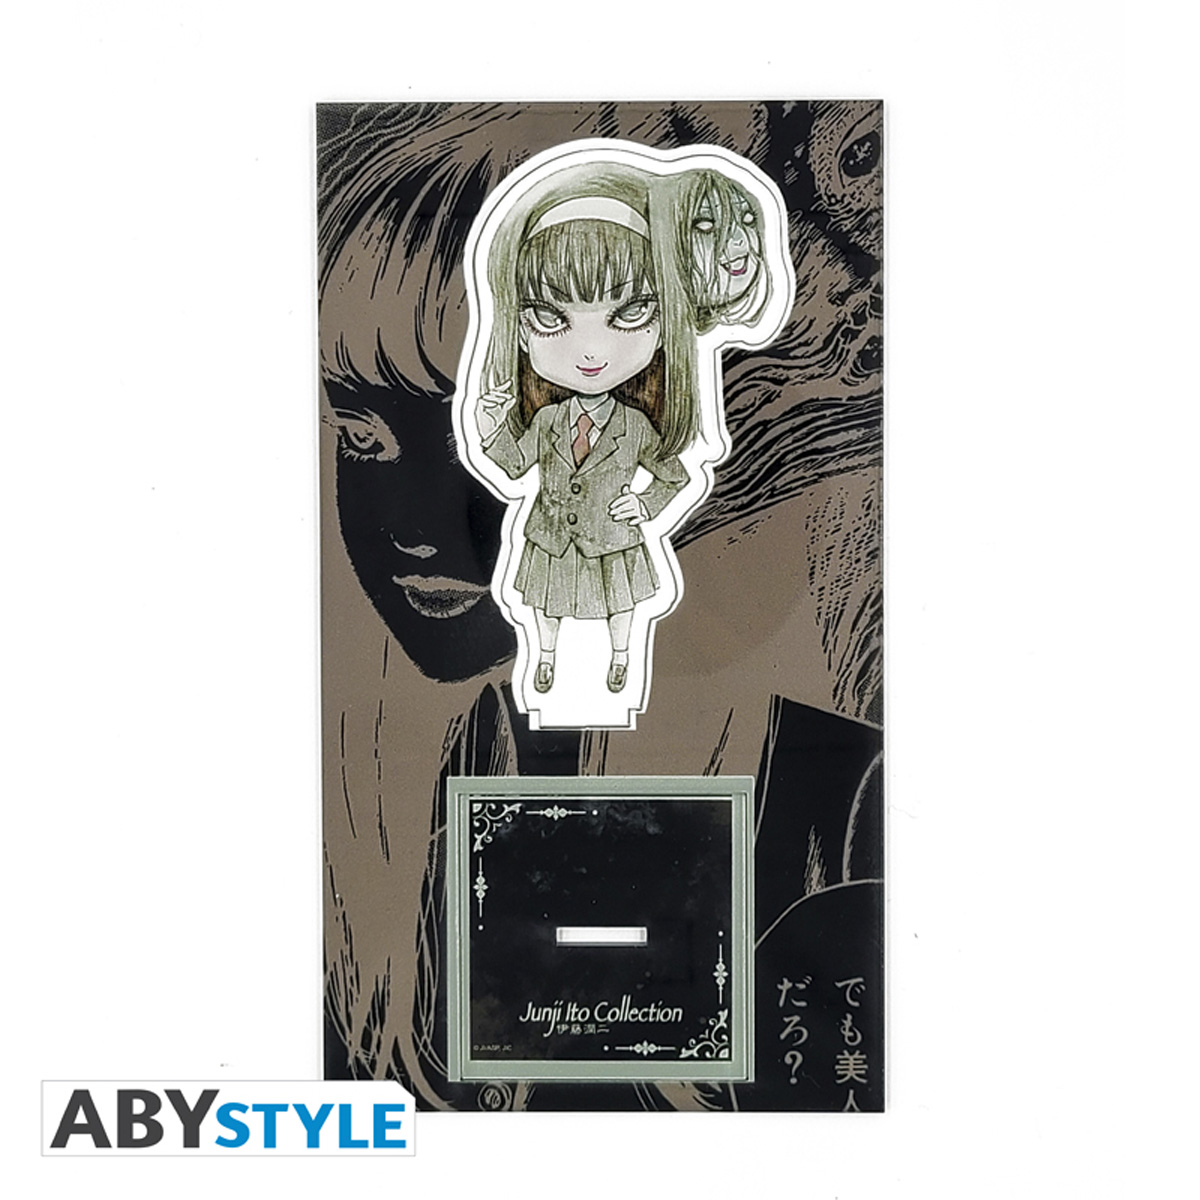  ABYSTYLE Junji Ito Chibi Boxed Unframed Poster Set